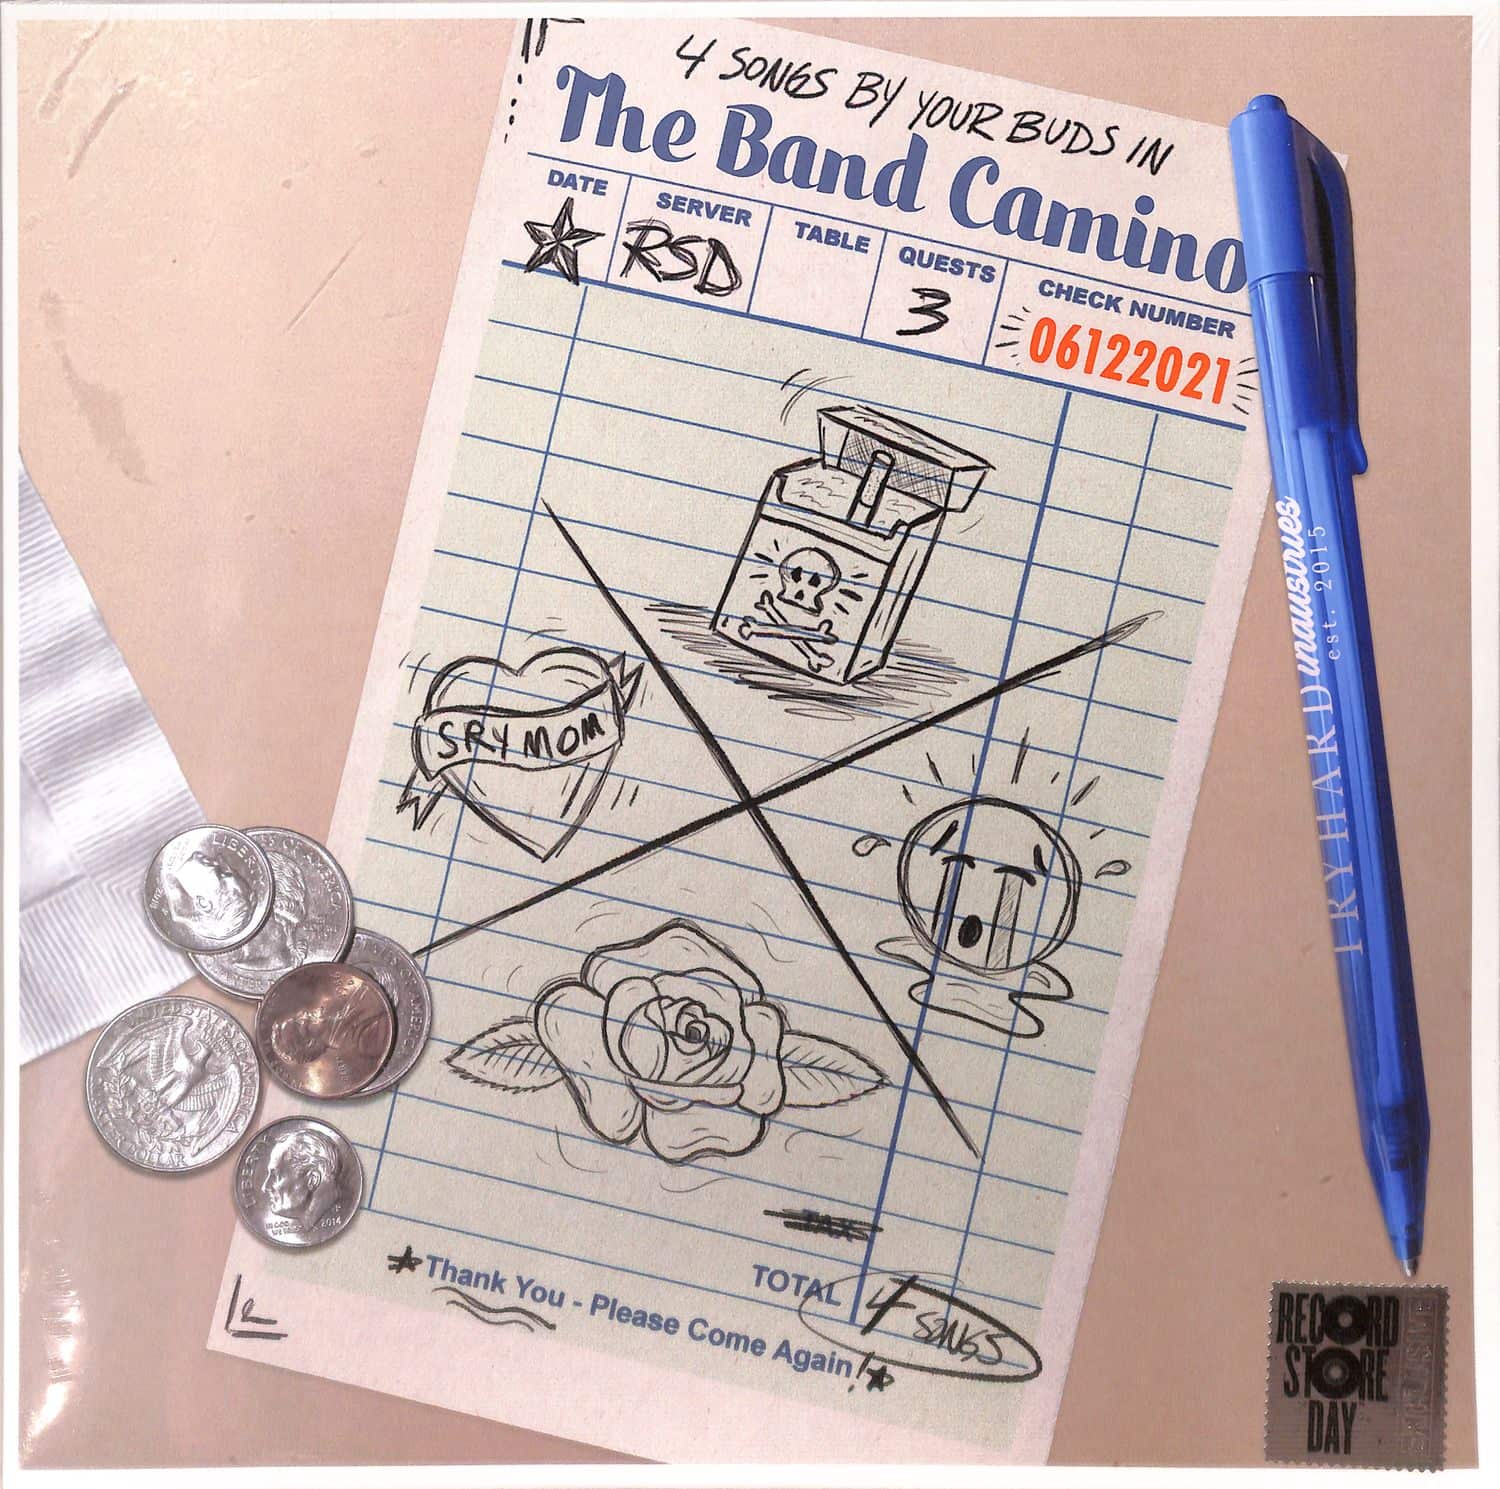 The Band Camino - 4 SONGS BY YOUR BUDS IN THE BAND CAMINO 